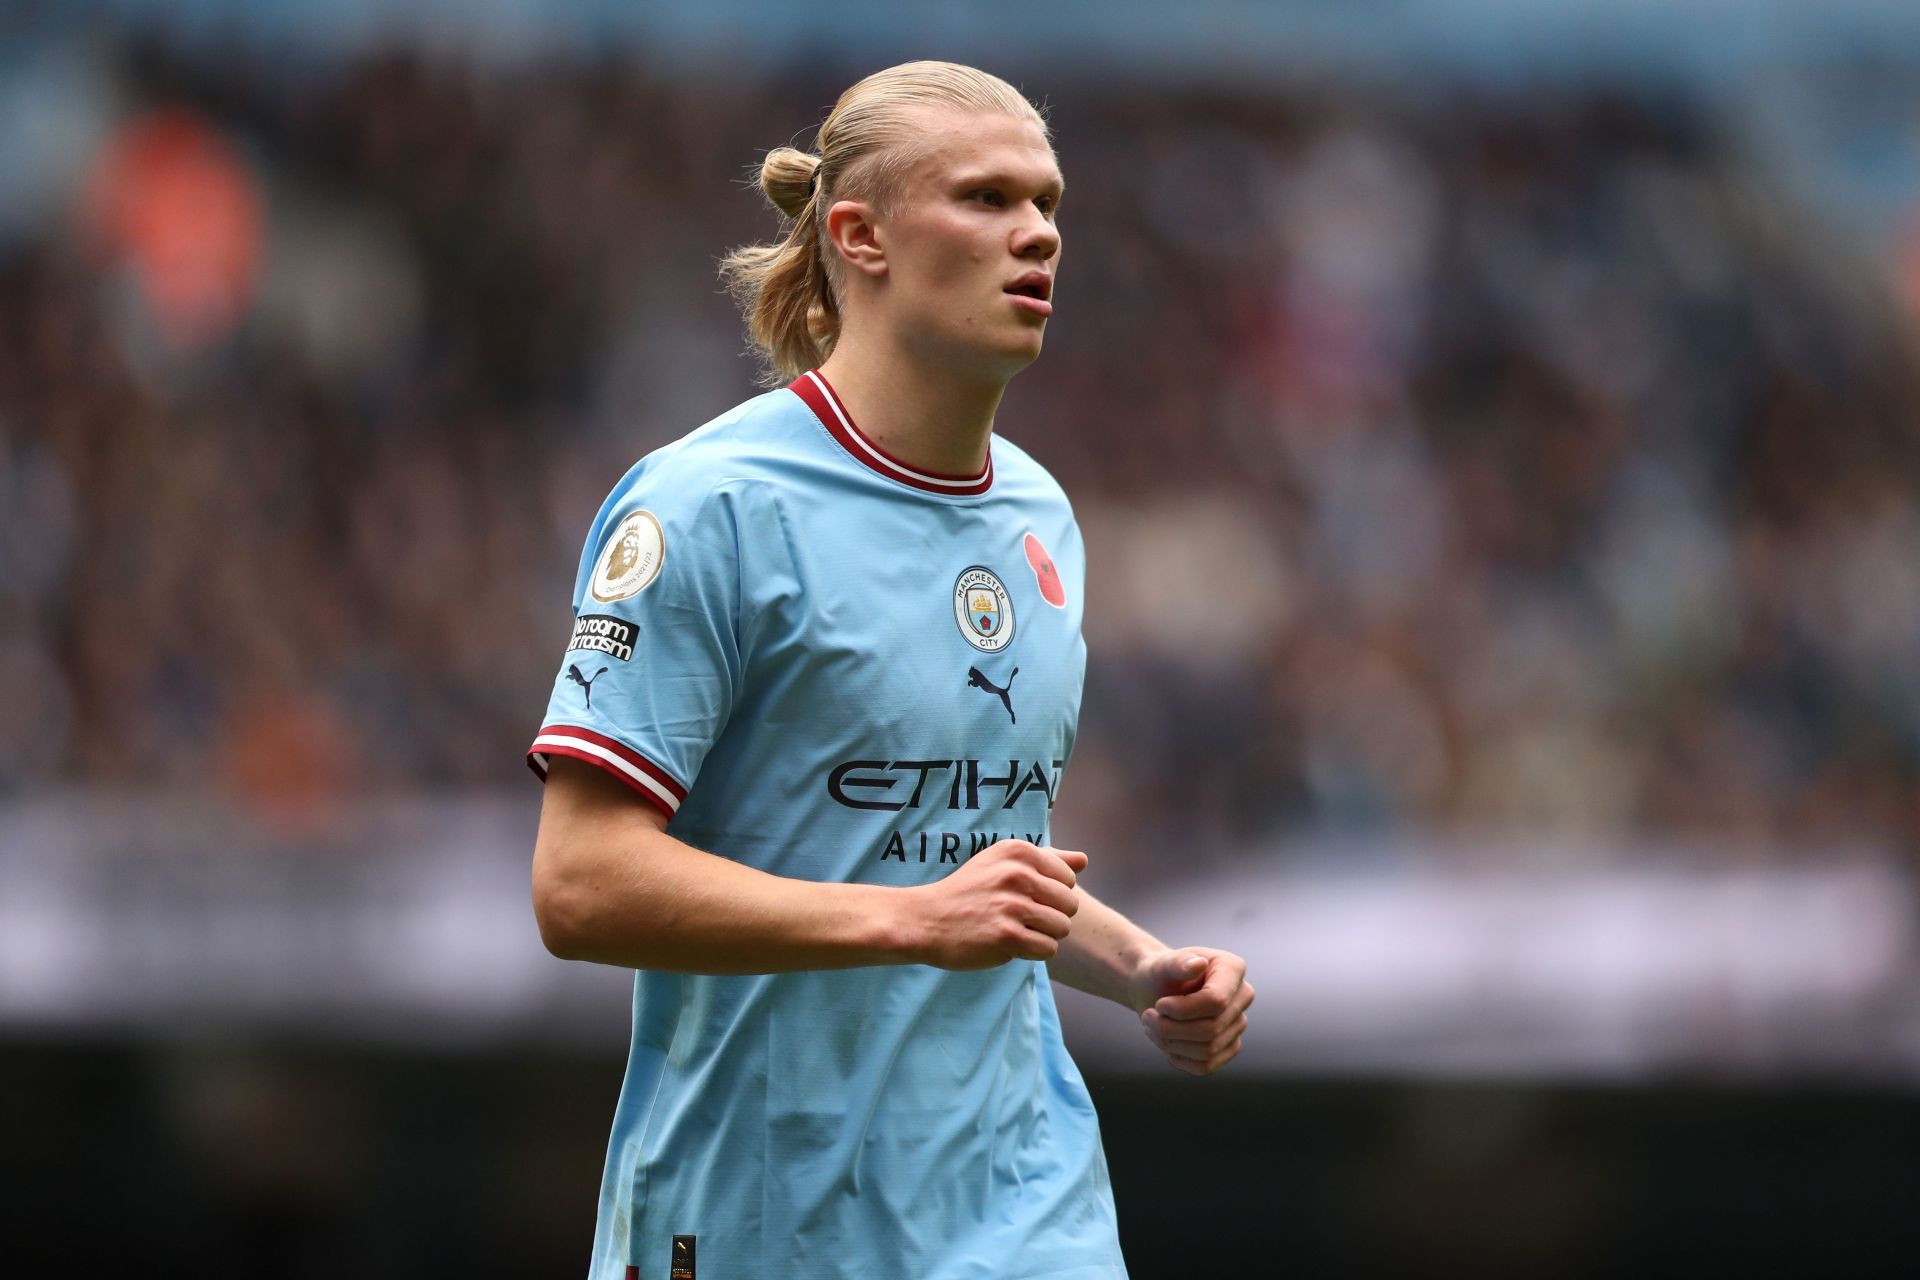 Erling Haaland was on fire for Manchester City prior to the FIFA World Cup.